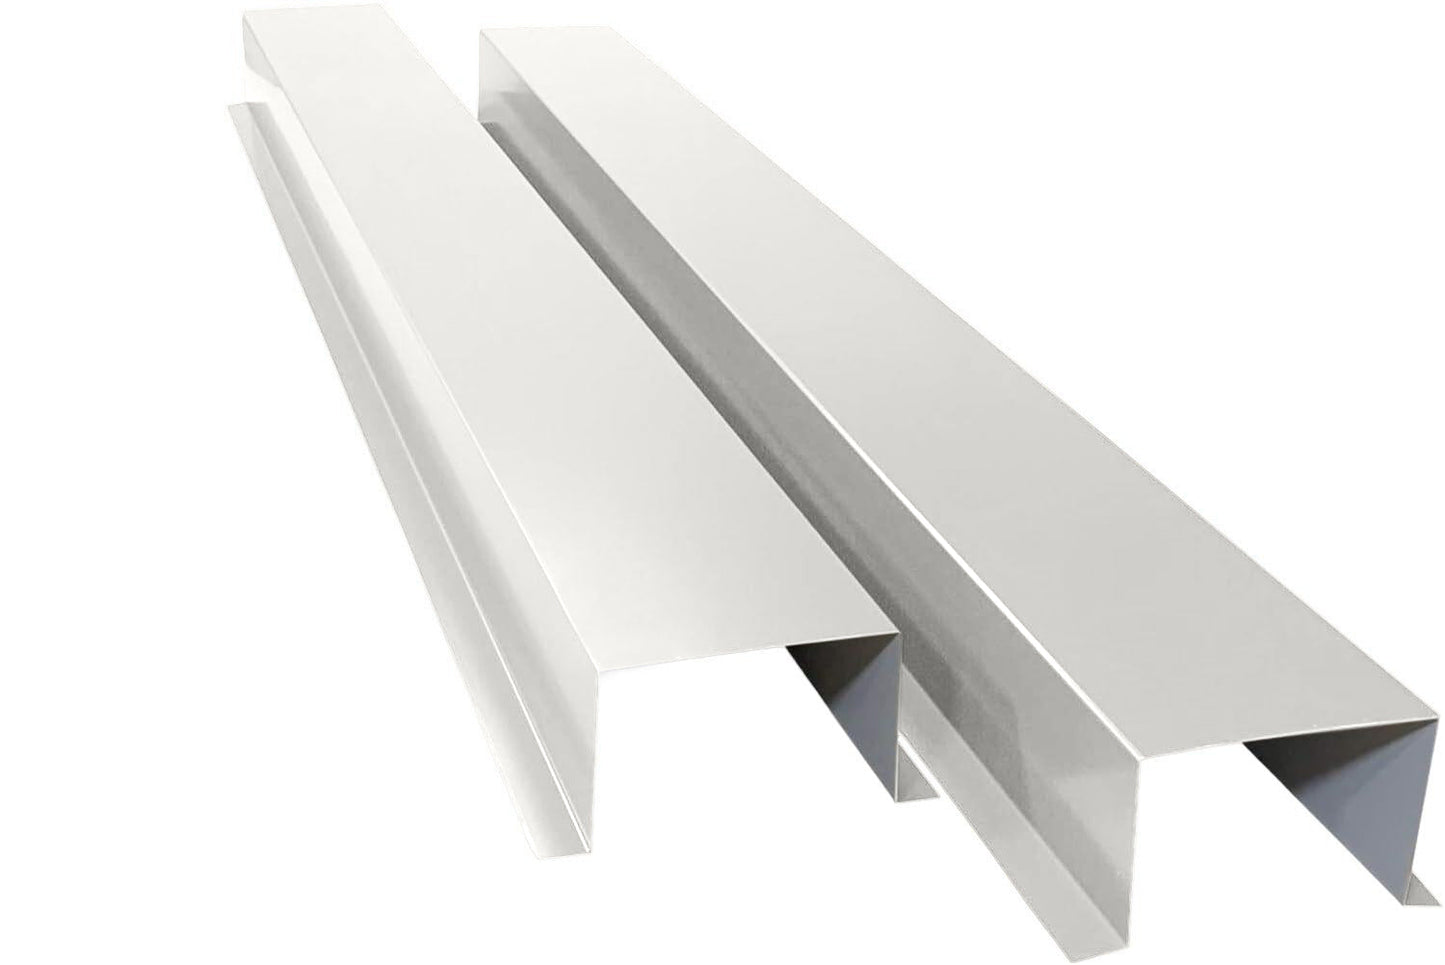 Two elongated, white metal Z-bars, crafted from 24 gauge painted metal, are positioned parallel to each other on a white background. With a Z-shaped cross-section and sharp, clean edges, these bars provide essential HVAC line protection in Perma Cover's Commercial Series - 24 Gauge Painted Metal HVAC Line Set Covers - Heavy Duty, Multiple Sizes & Colors applications.